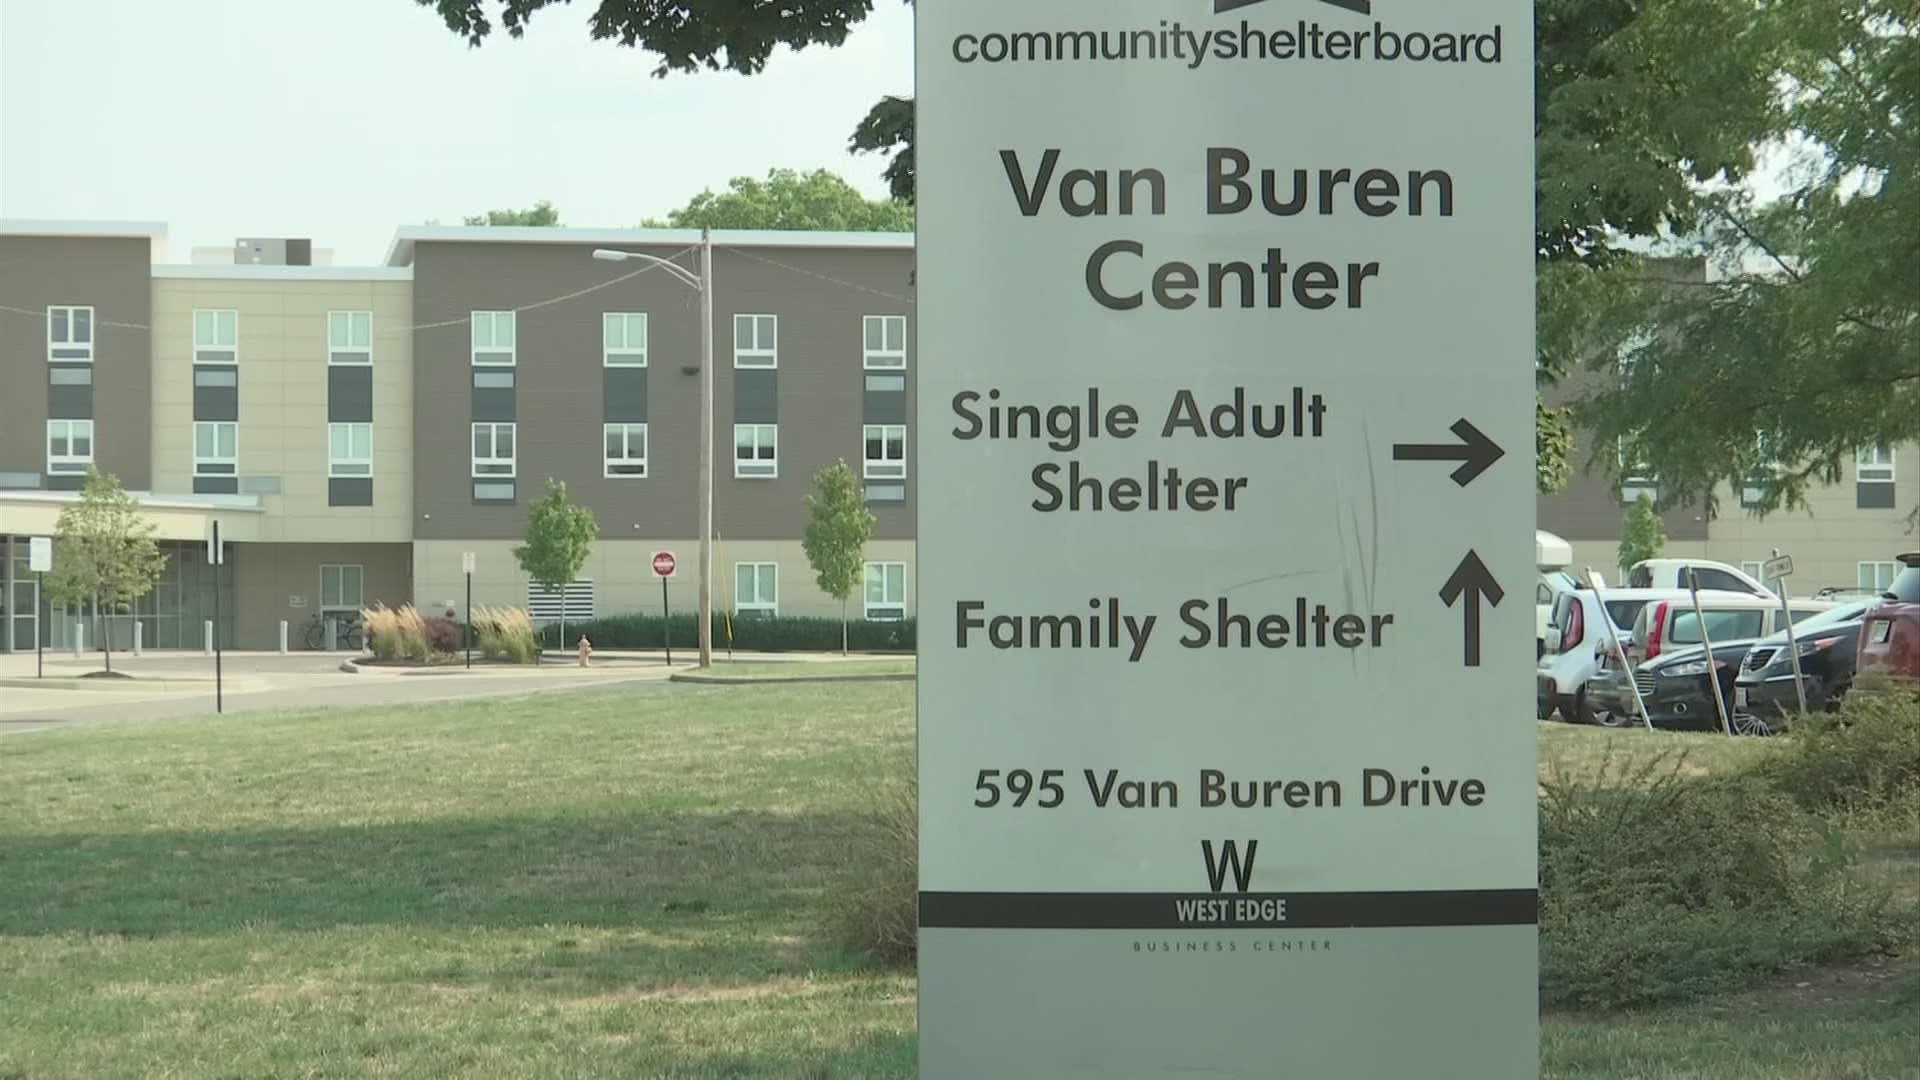 Lots of families are receiving help from the Community Shelter Board.